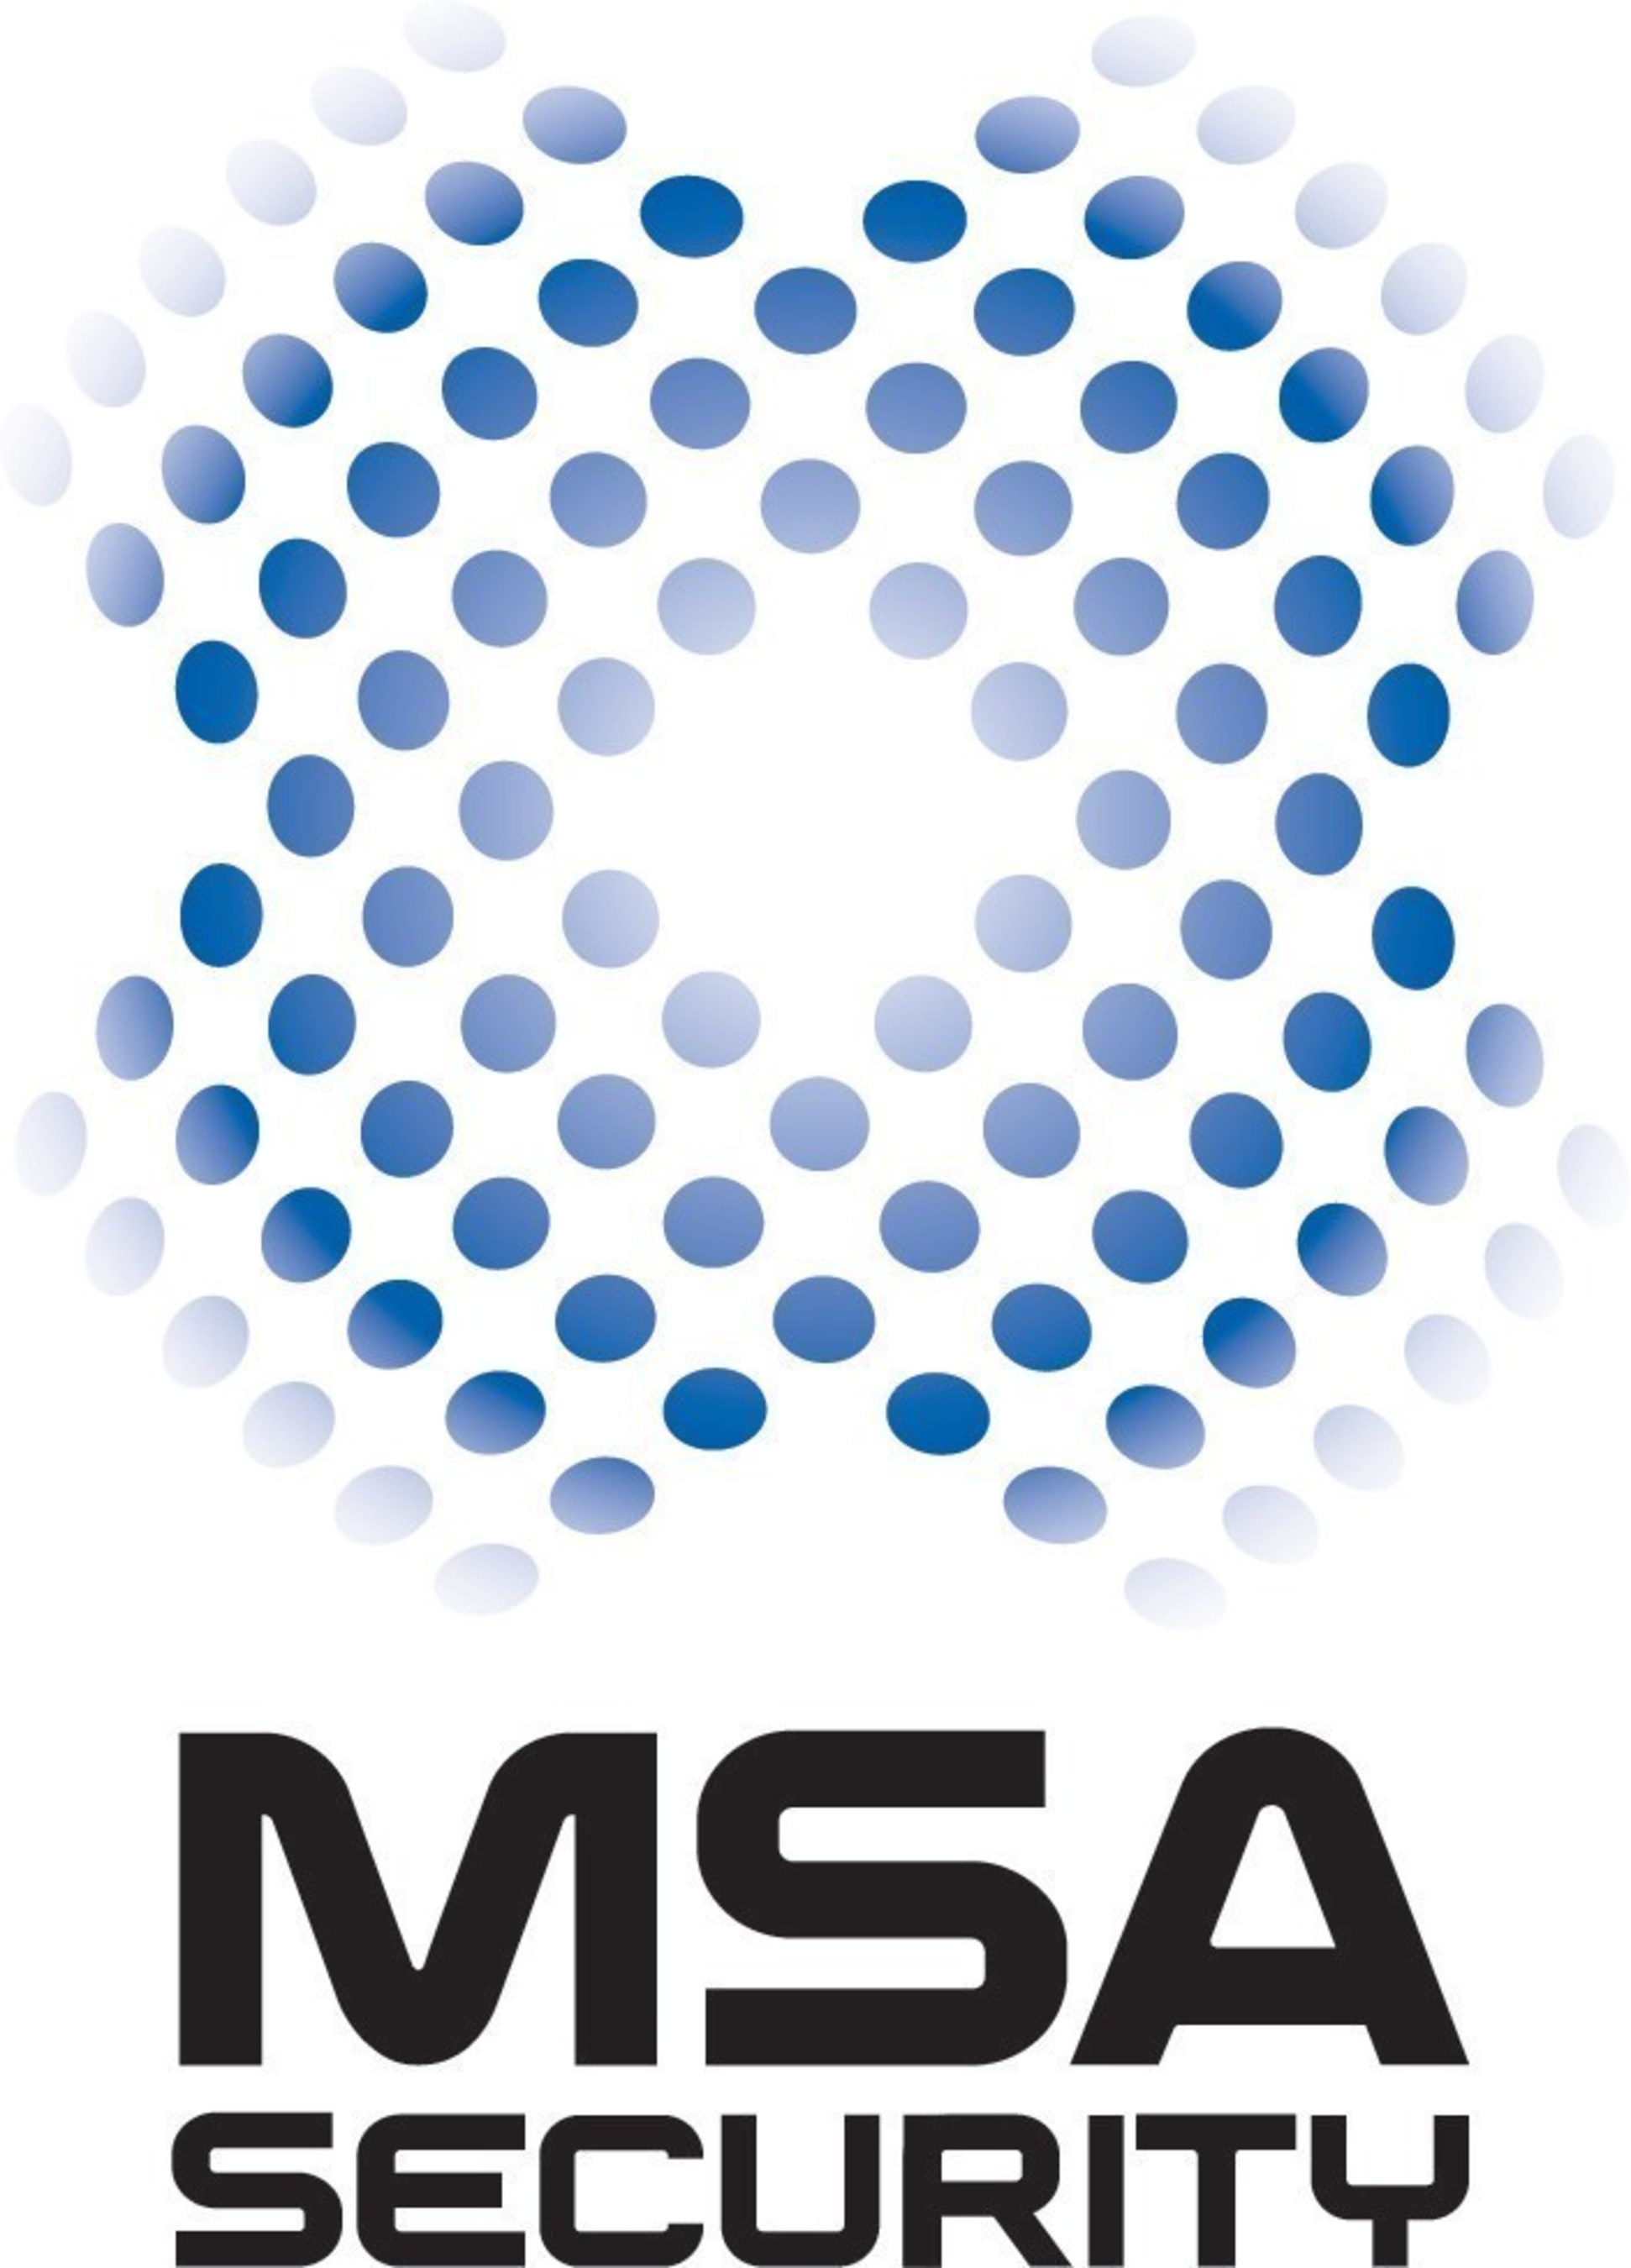 MSA SECURITY | IN THE BUSINESS OF BUSINESS-AS-USUAL(TM)